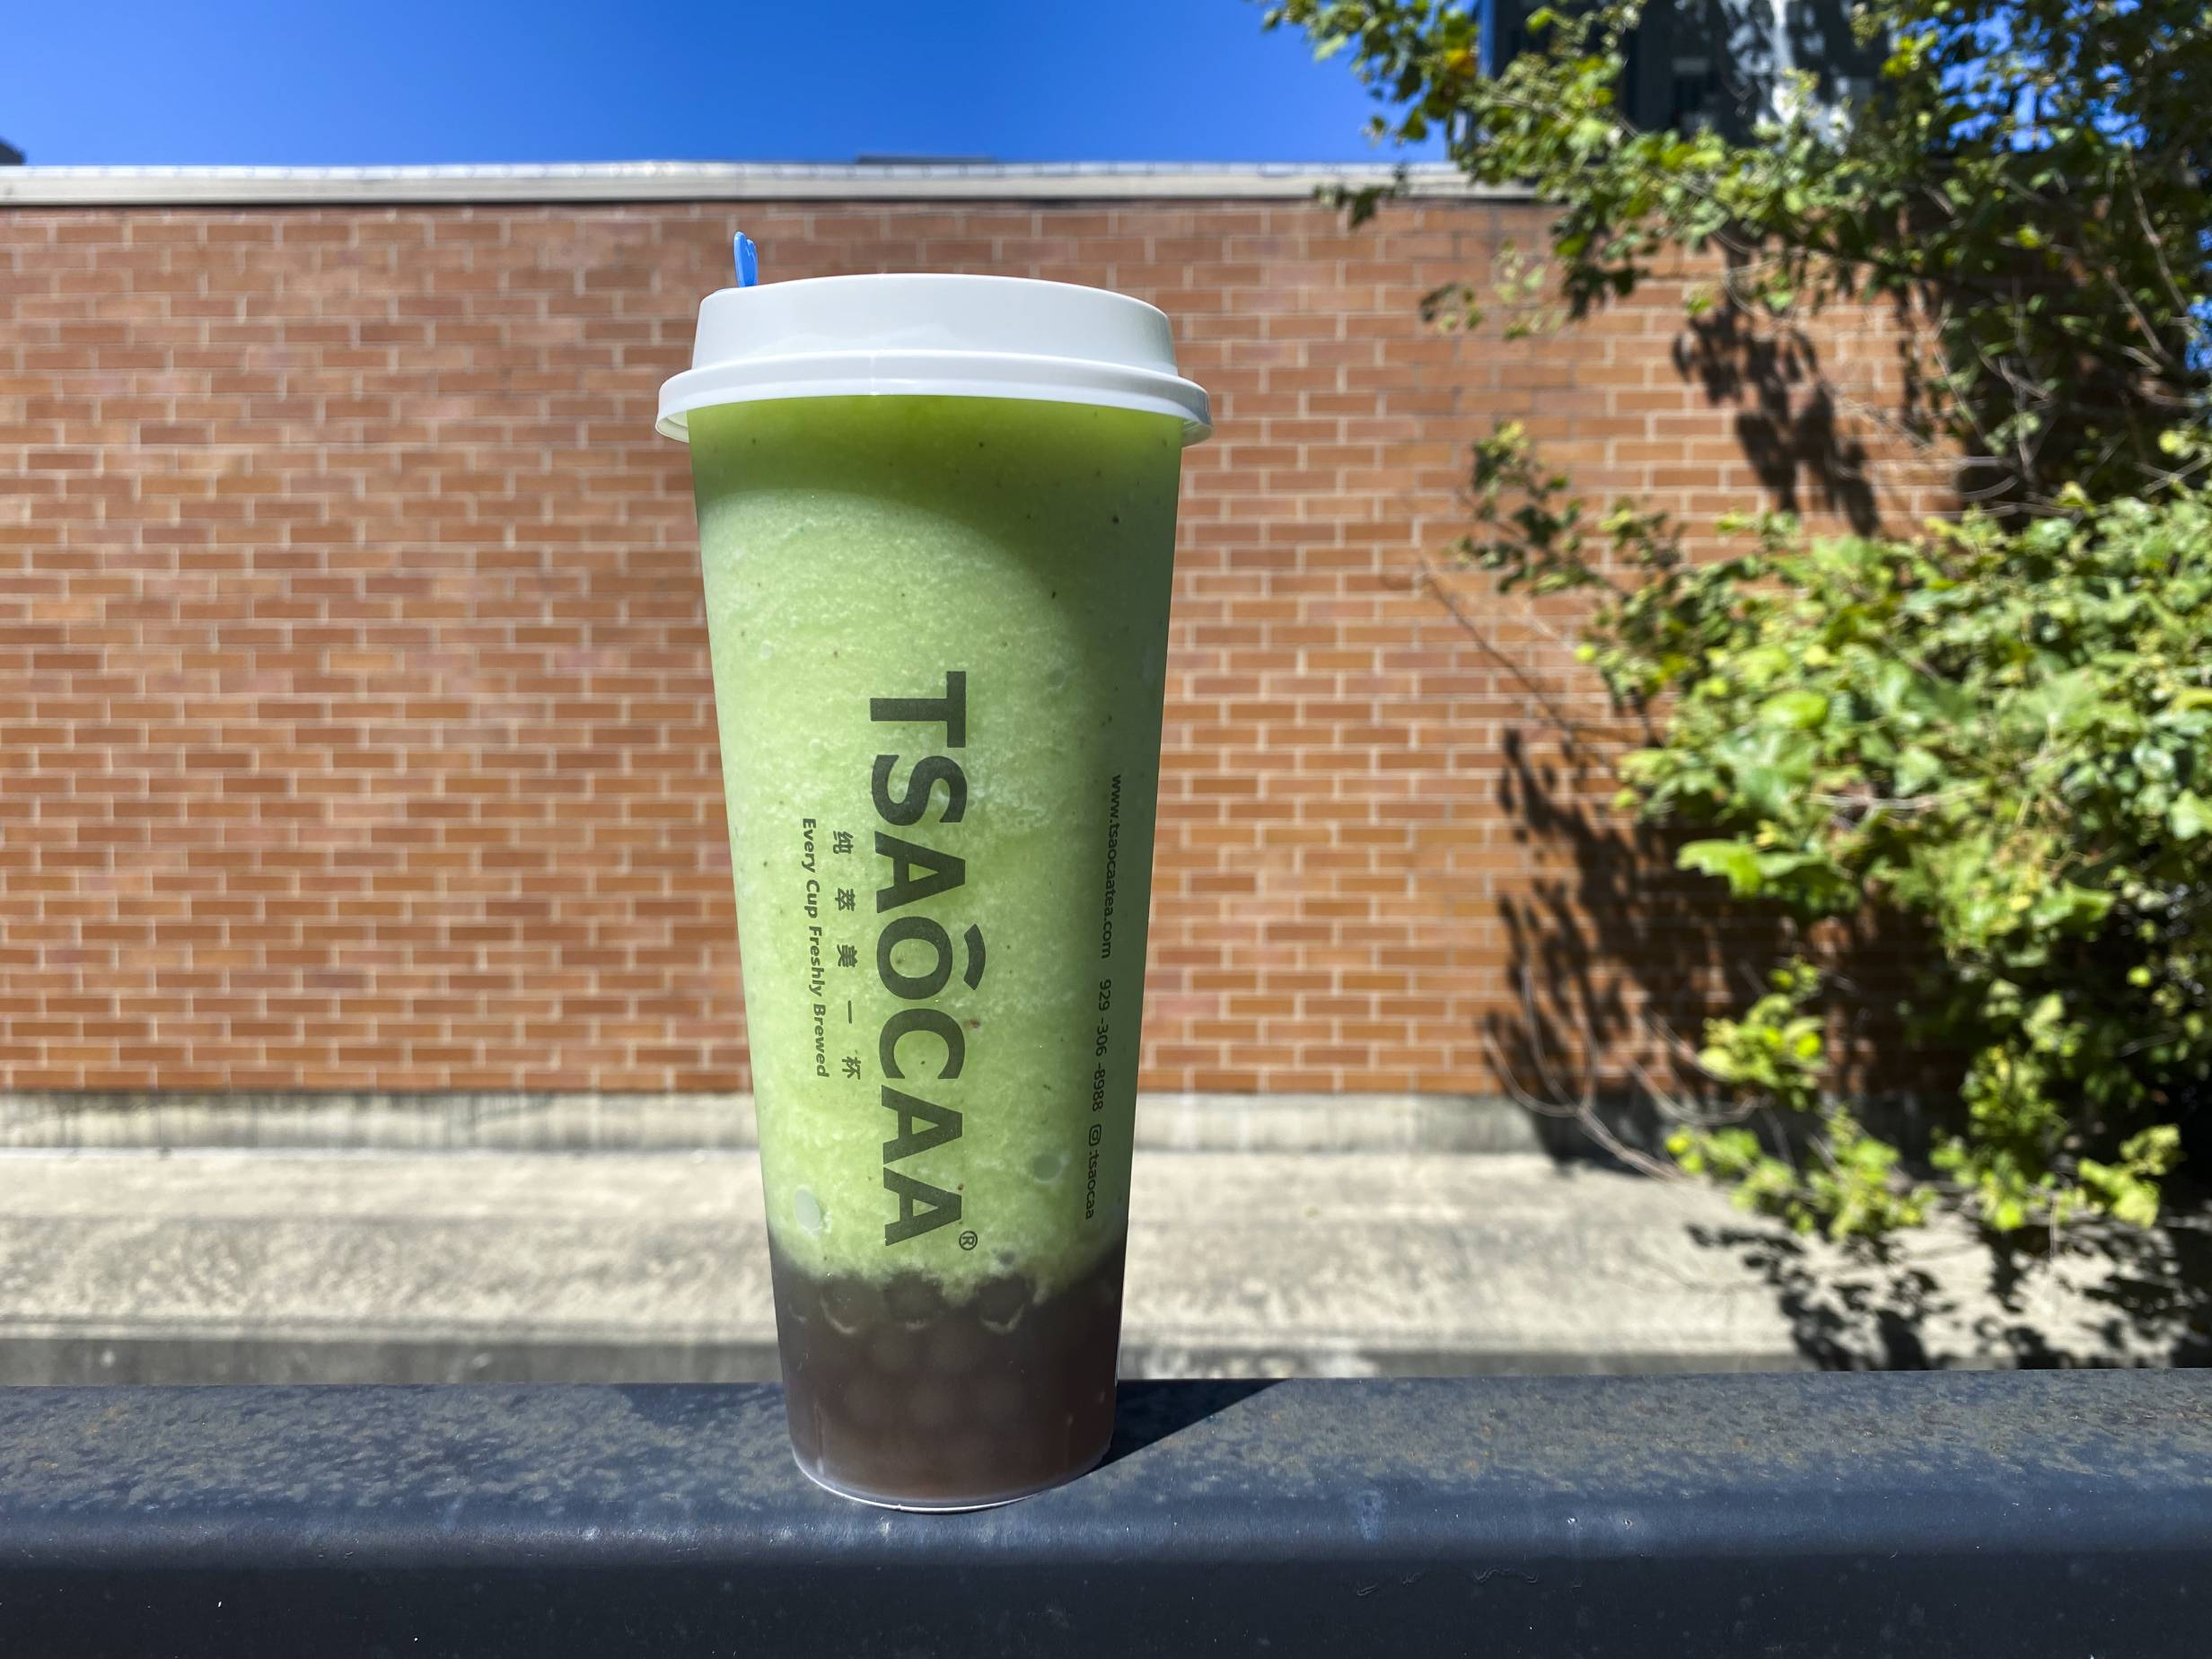 A green kiwi smoothie from Mitsu & Tsaocaa balances on a black railing in an outdoor setting in Champaign, Illinois. Photo by Chantal Vaca.